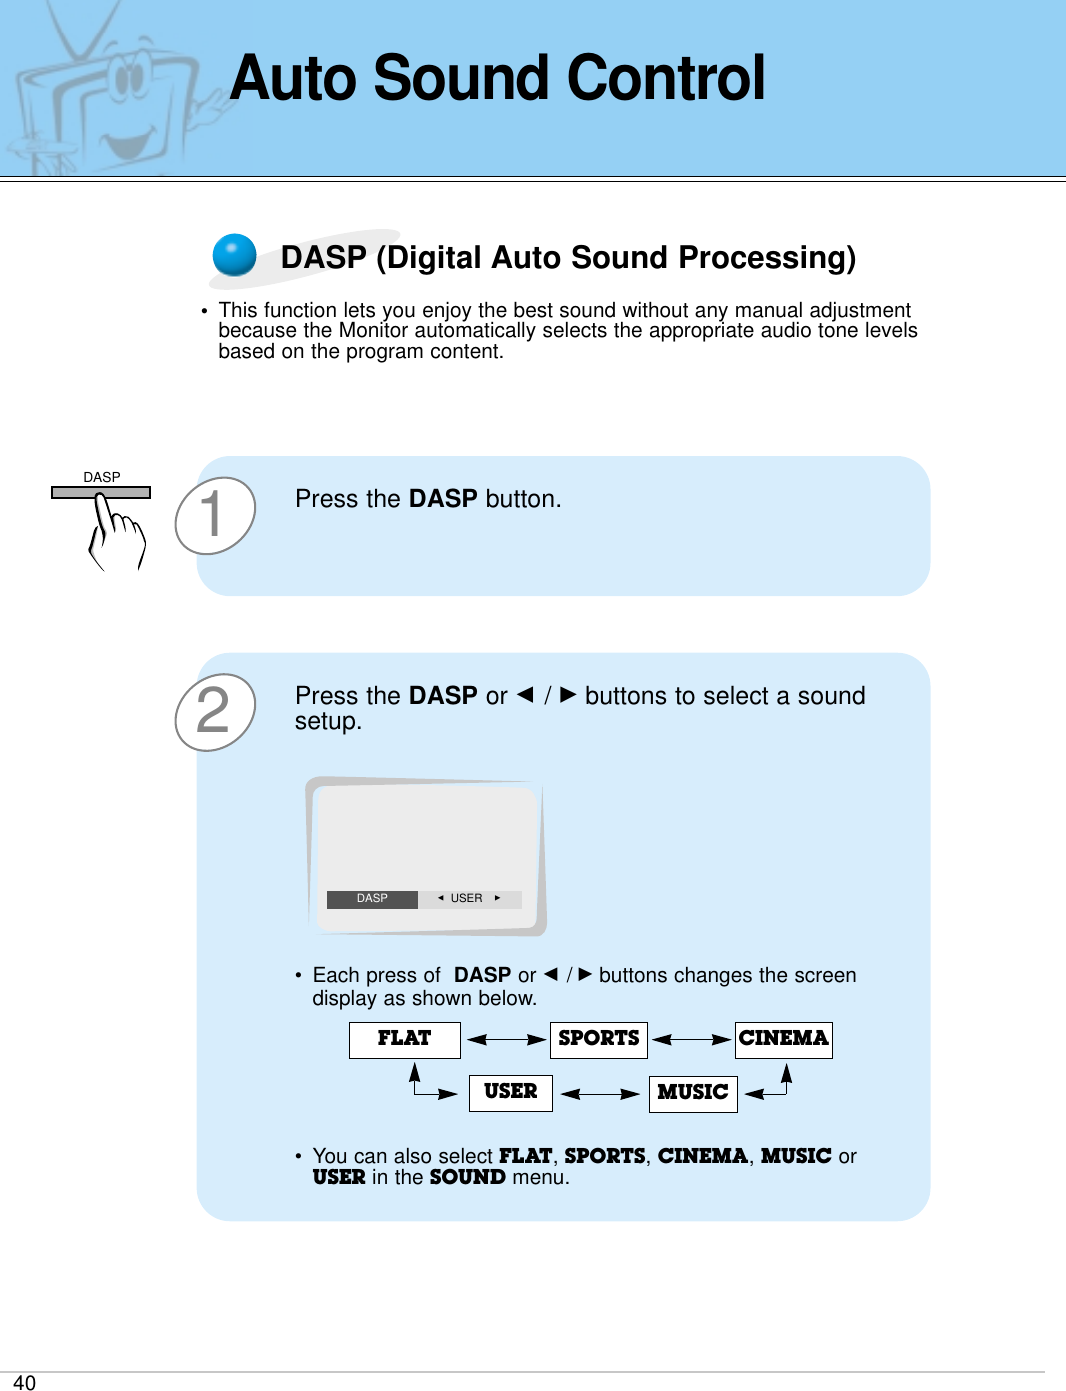 40Auto Sound ControlDASP (Digital Auto Sound Processing)•This function lets you enjoy the best sound without any manual adjustmentbecause the Monitor automatically selects the appropriate audio tone levelsbased on the program content.1Press the DASP button. 2Press the DASP or F / Gbuttons to select a soundsetup.•Each press of  DASP or F /Gbuttons changes the screendisplay as shown below.•You can also select FLAT, SPORTS, CINEMA, MUSIC orUSER in the SOUND menu. FLAT SPORTSUSERCINEMAMUSICF  USER GDASPDASP